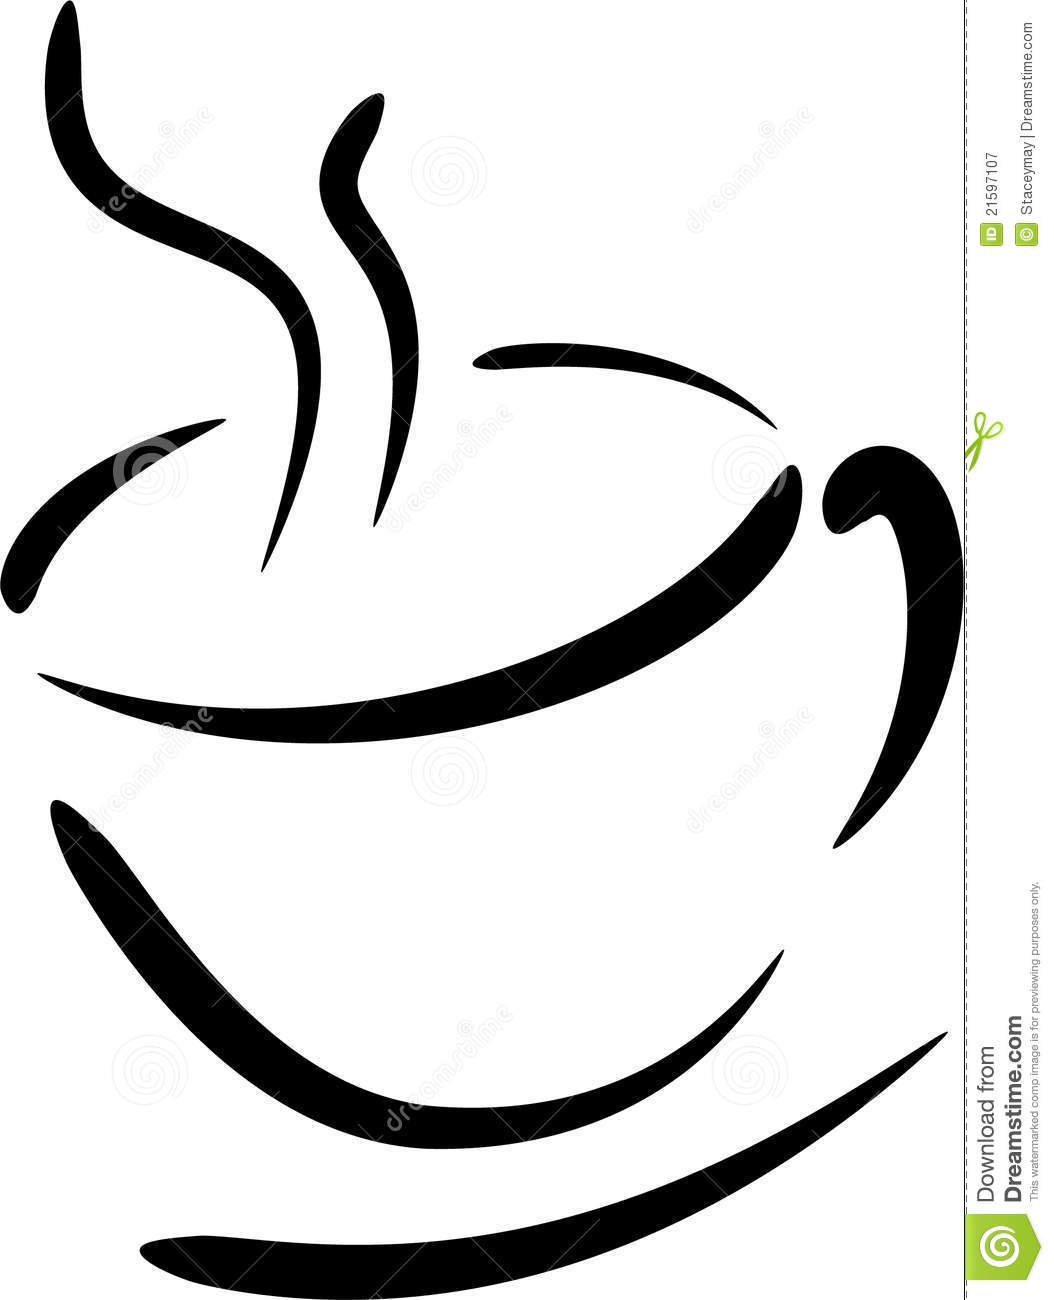 Coffee Cup Illustration Royalty Free Stock Photography Image